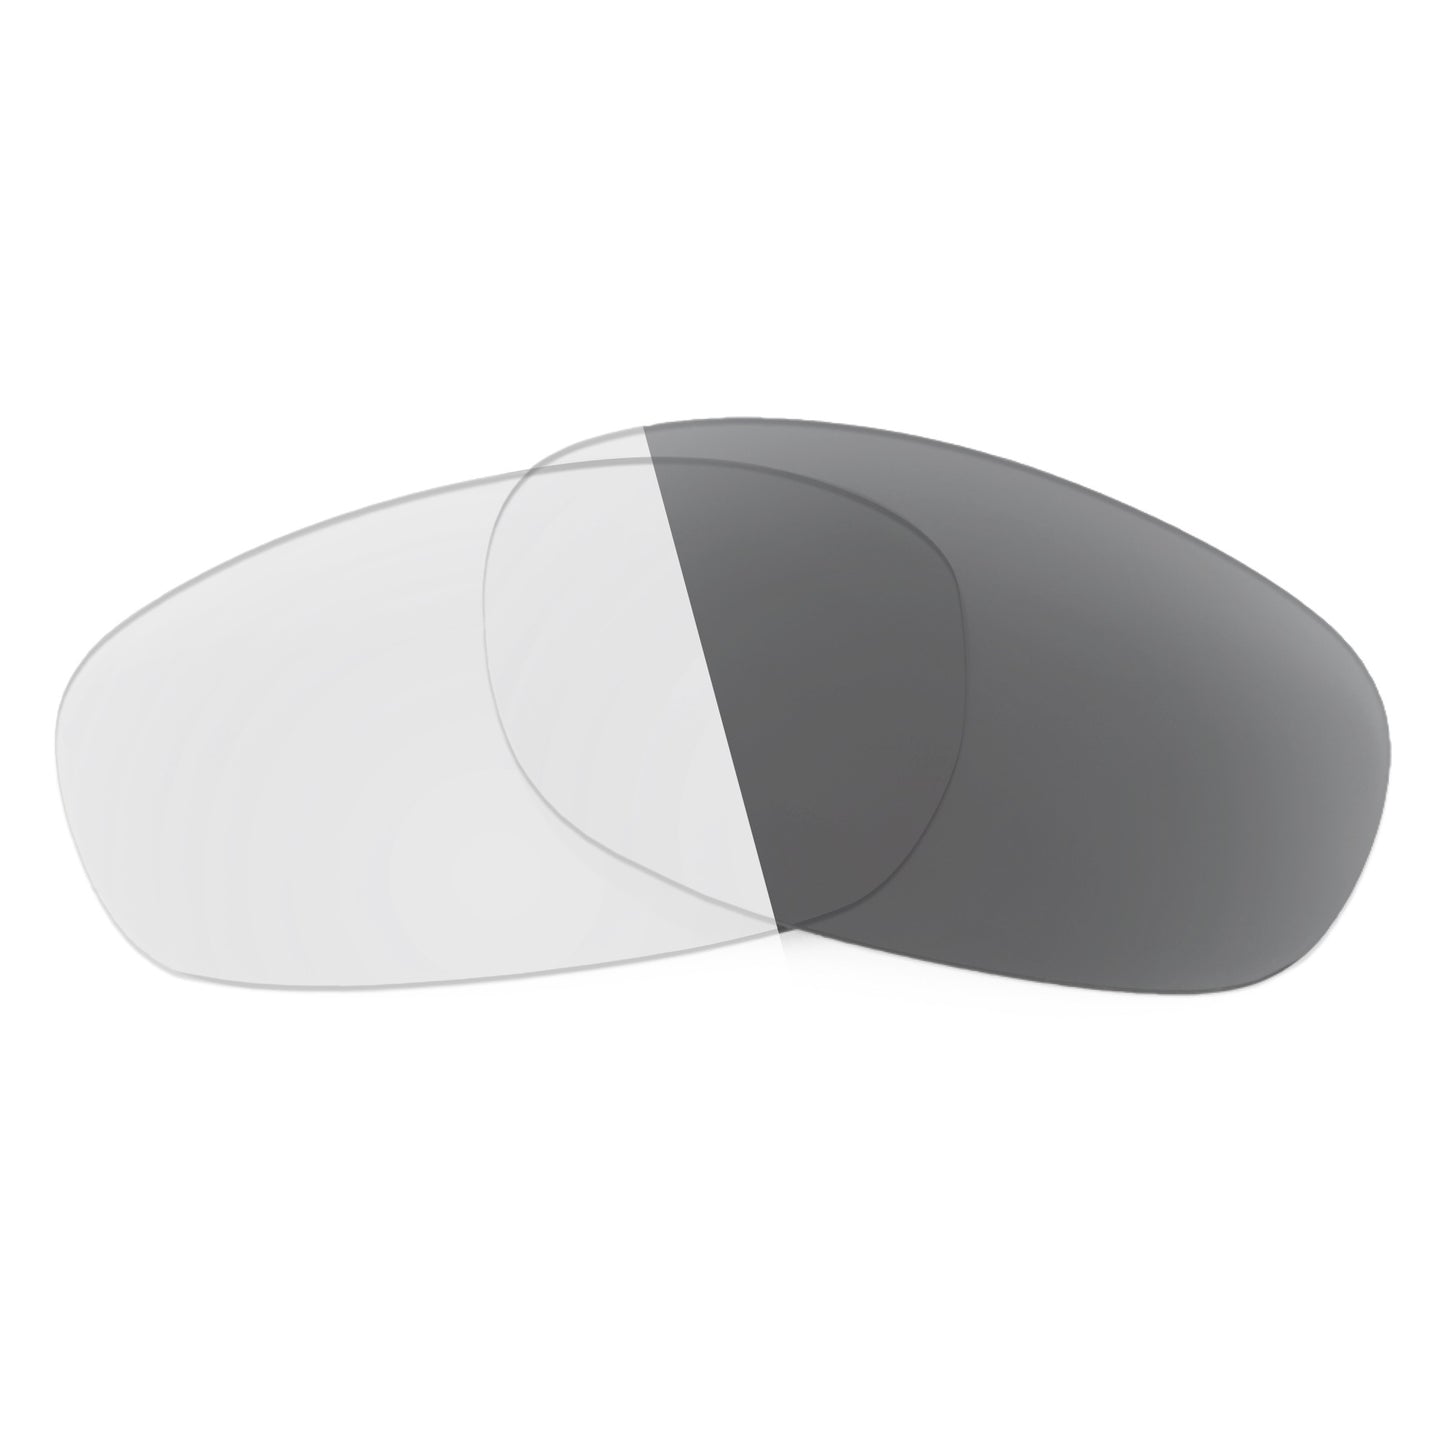 Revant replacement lenses for Ray-Ban RB3215 59mm Non-Polarized Adapt Gray Photochromic